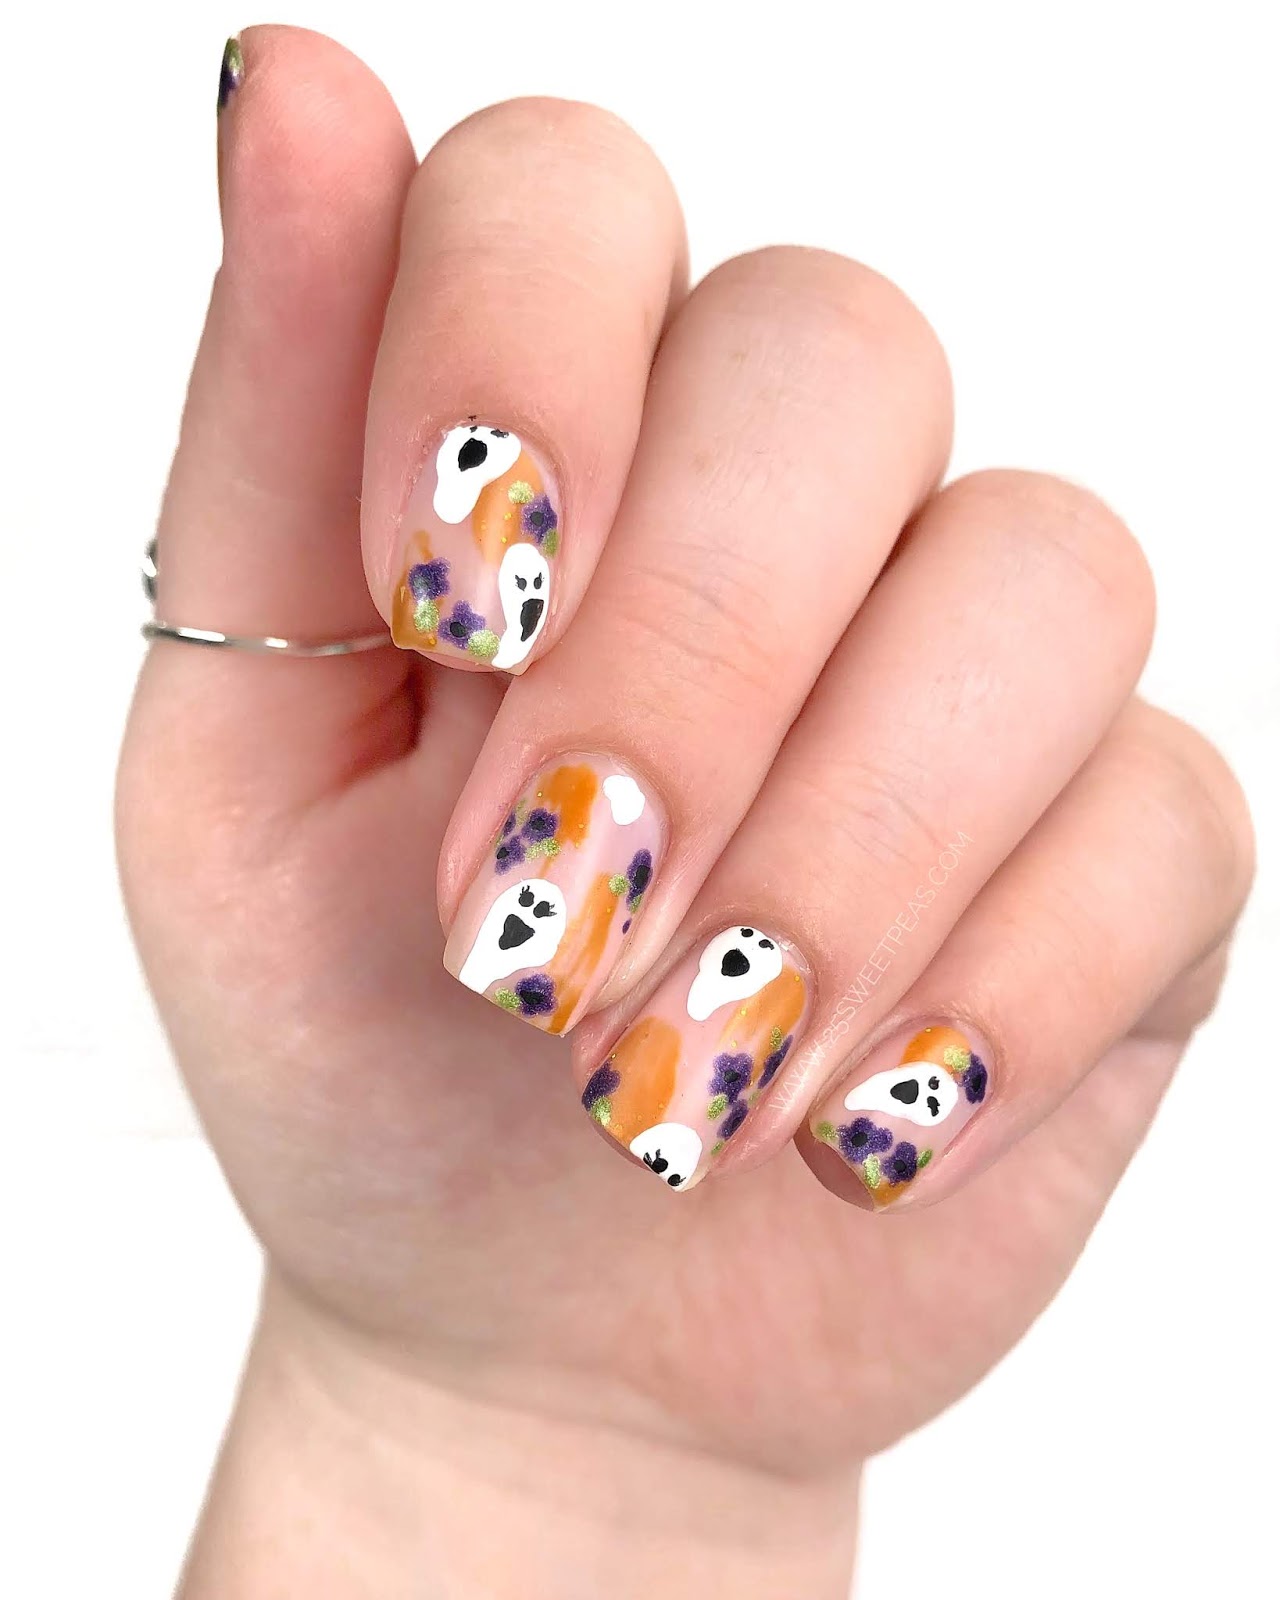 Make a Statement this Halloween with Almond Nails